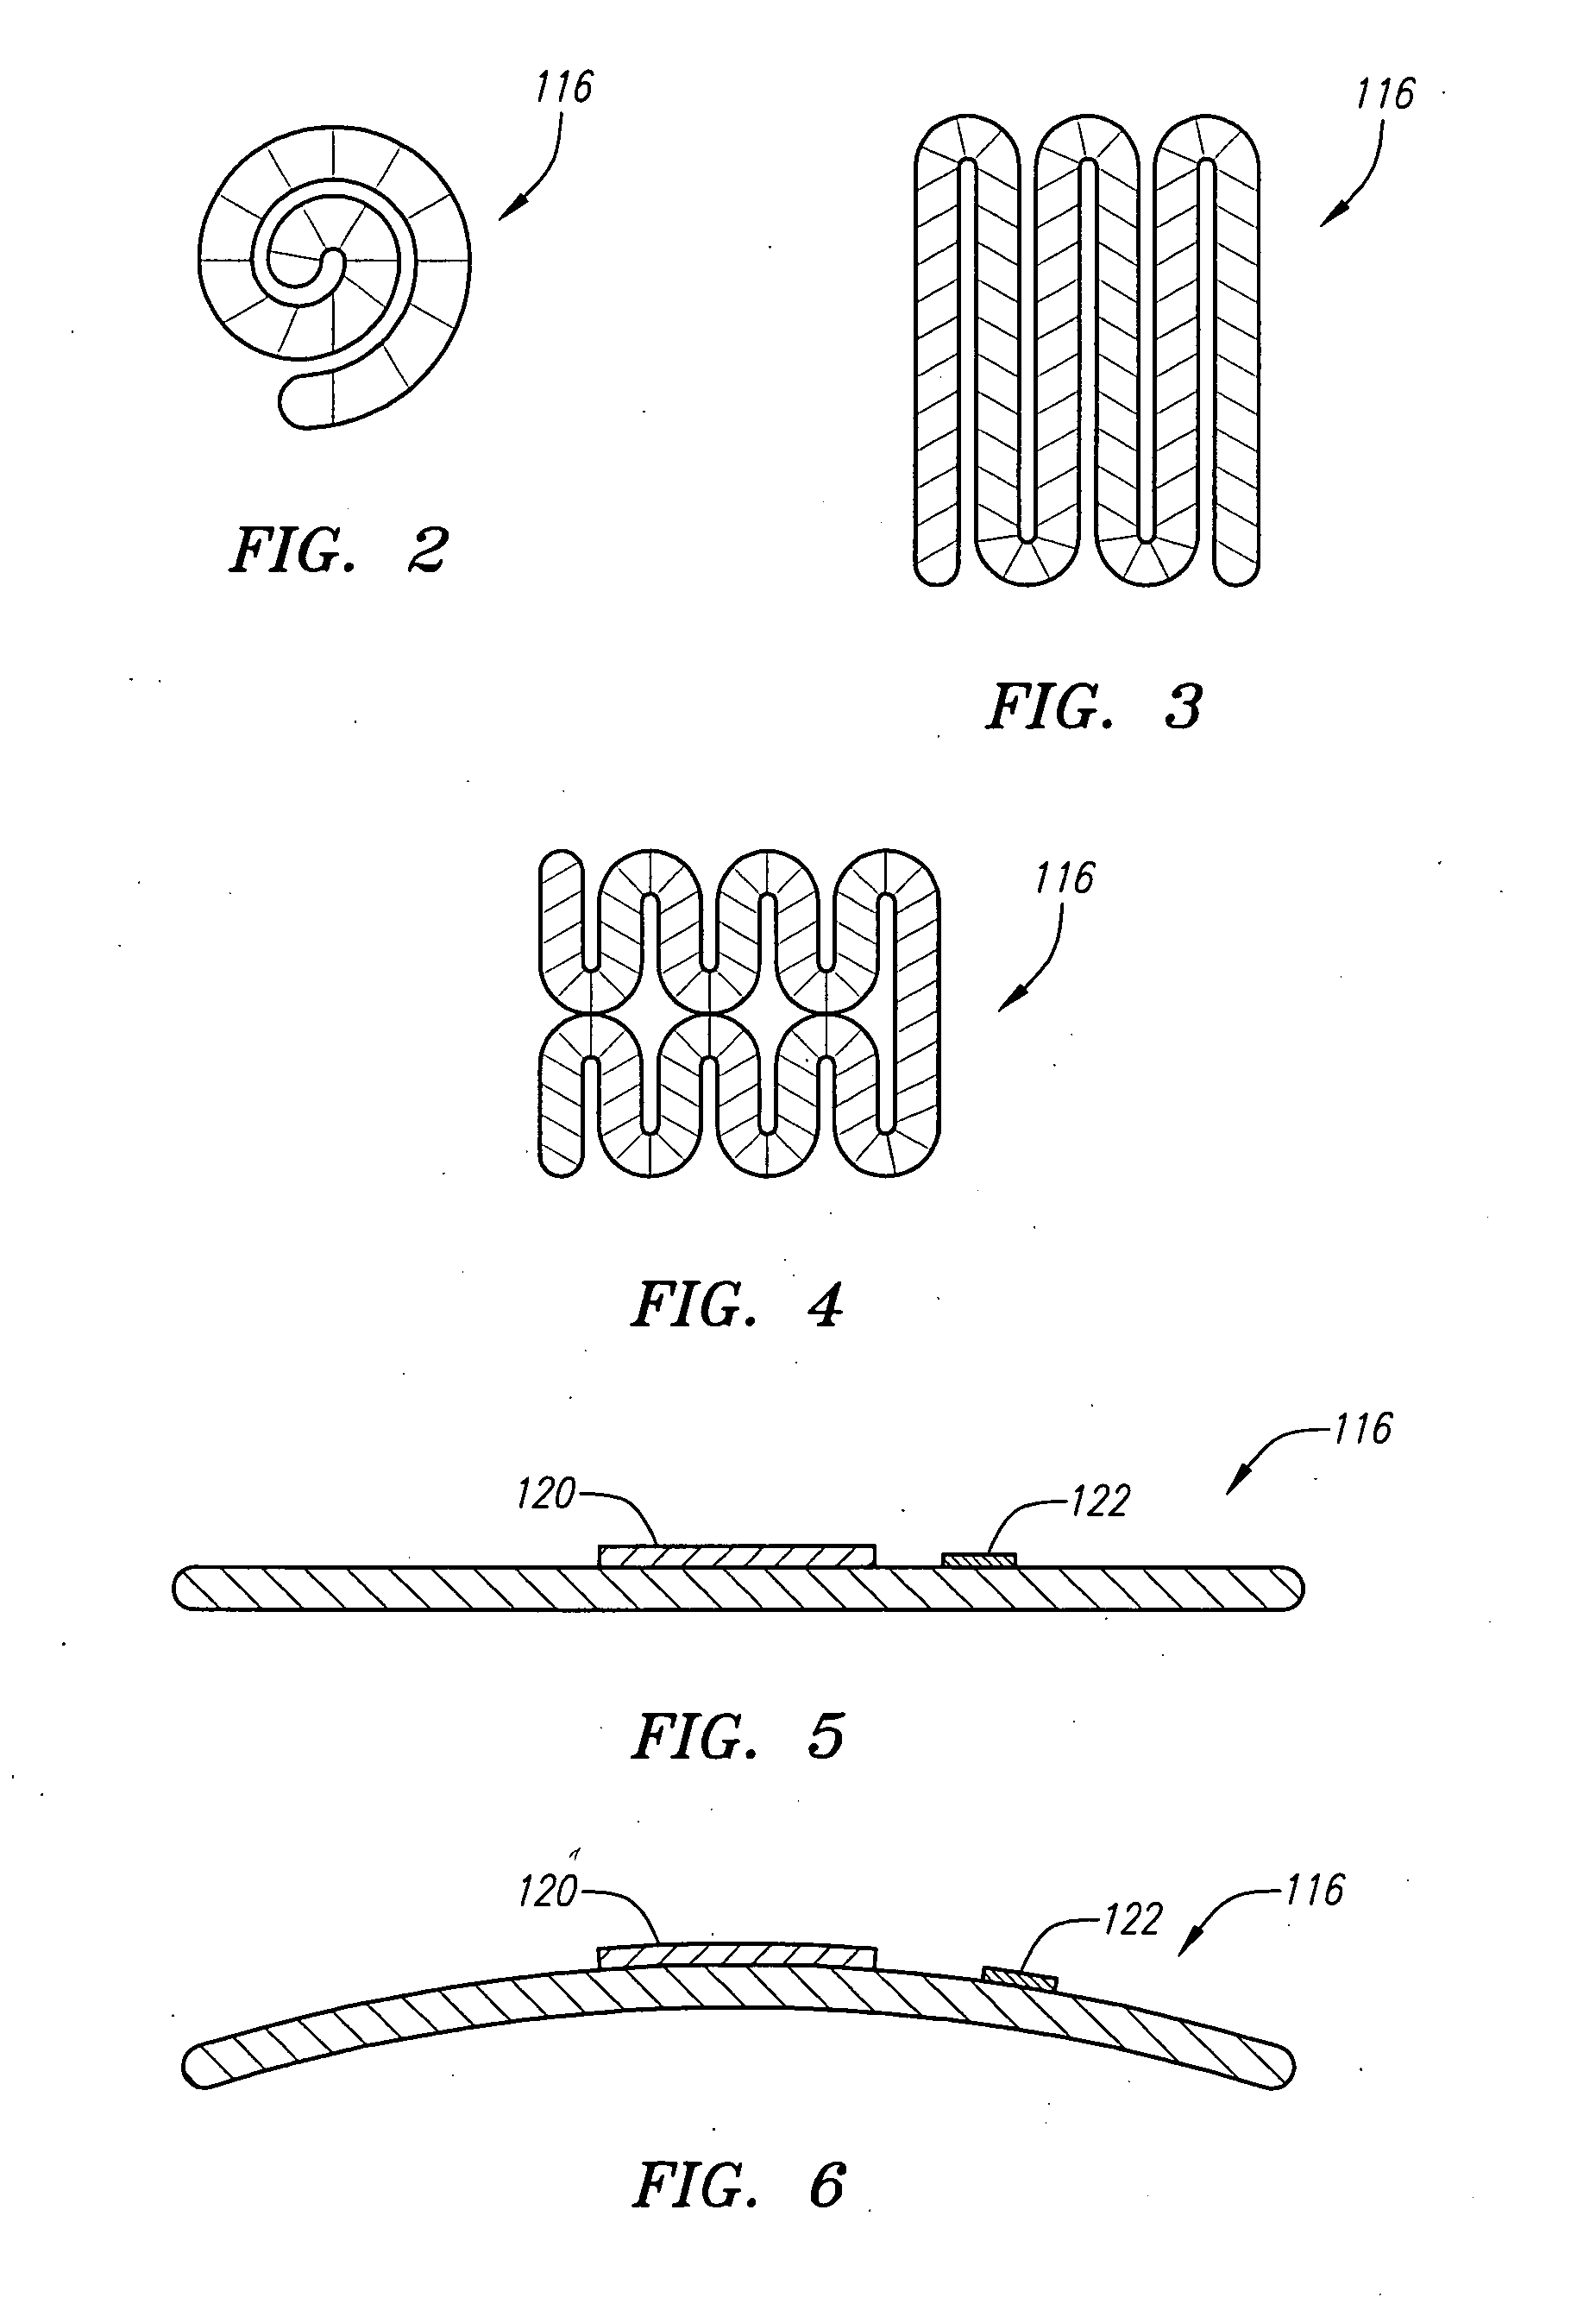 Collapsible/expandable electrode leads